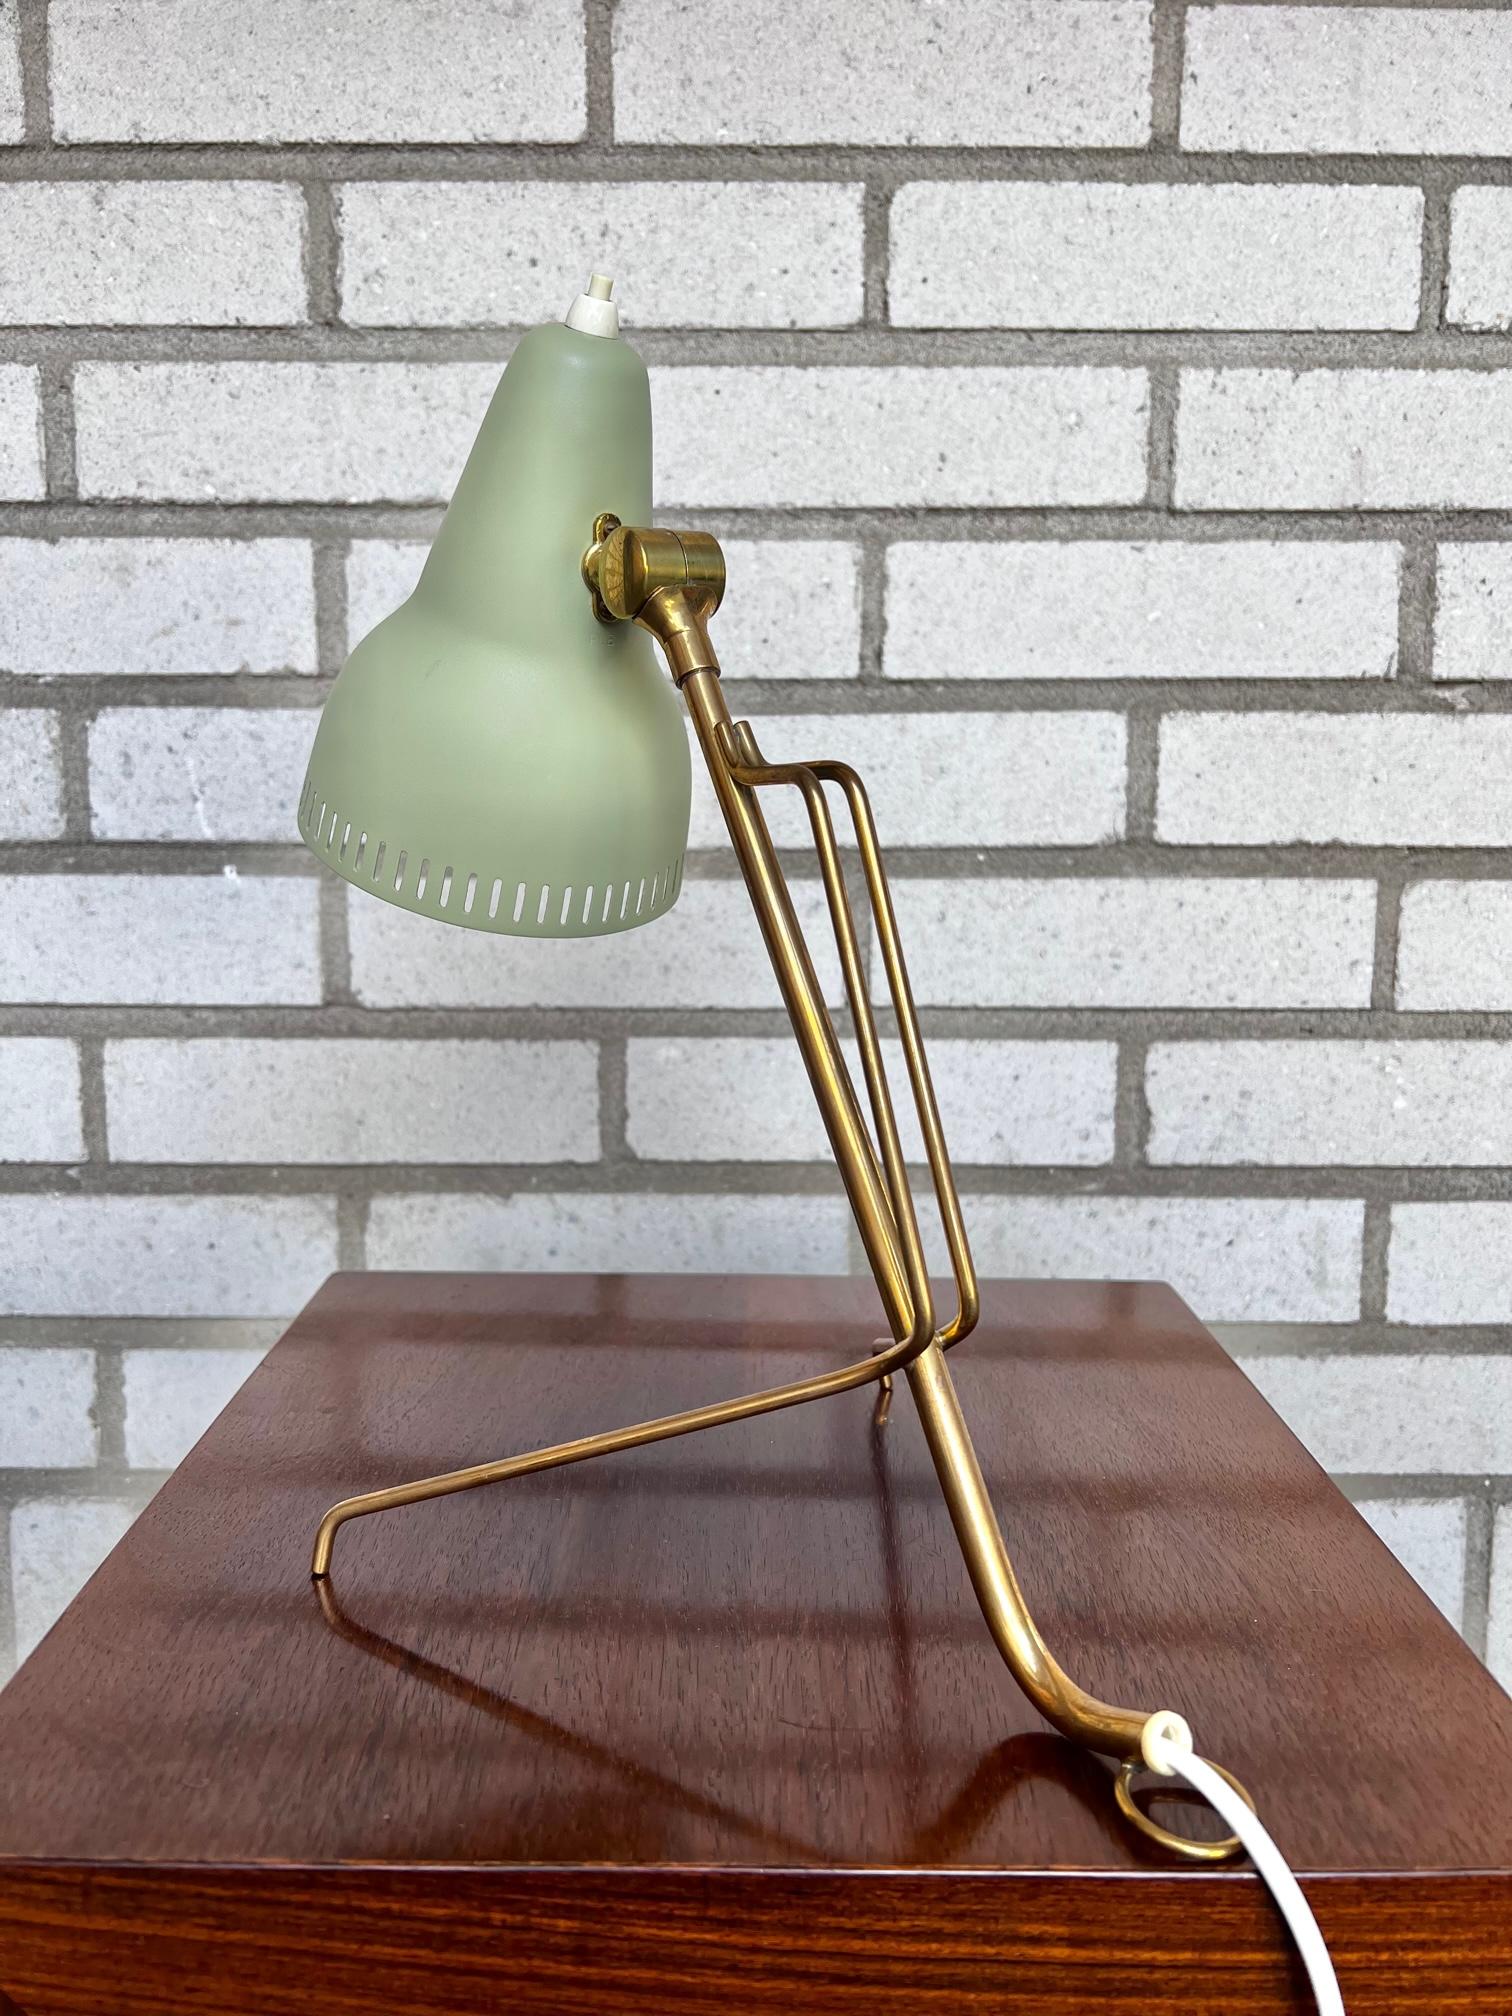 The lamp is manufactured by Falkenbergs Belysning in 1950-60s. The lamp consists of a brass base with the light source hidden by a green perforated metal shade. The lamp is due to its age in very good condition. 

The lamp could both be used as a